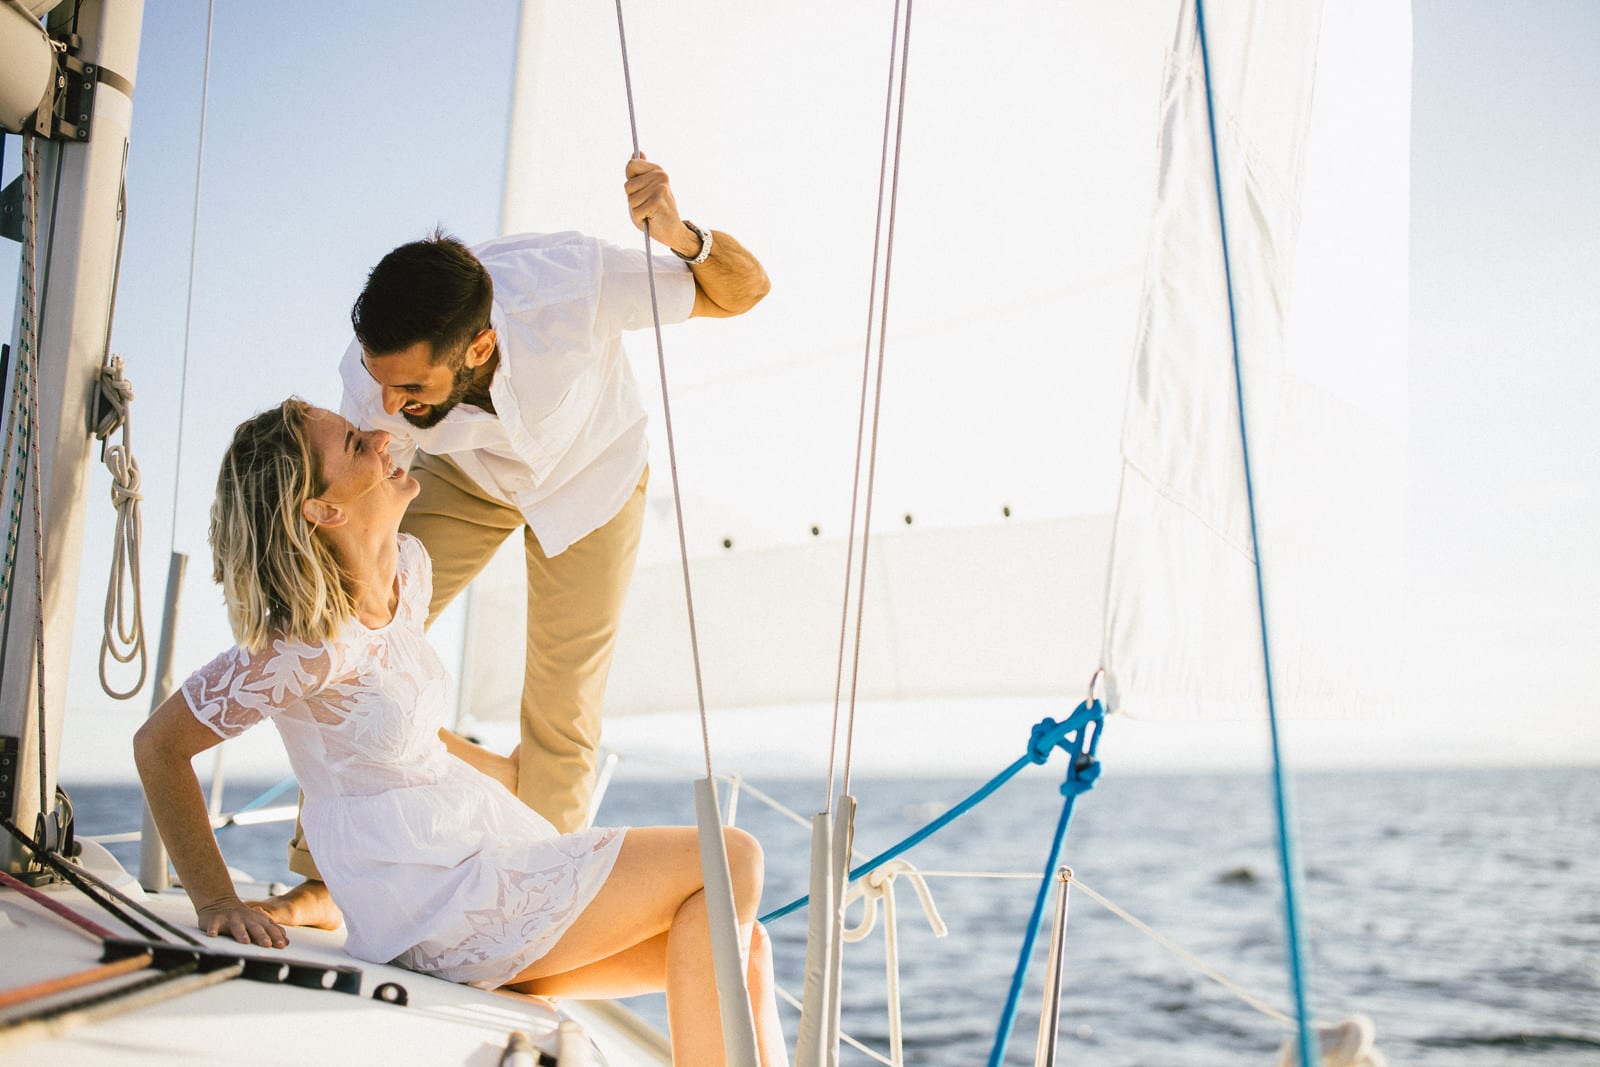 Couple Kisses each other on sailboat